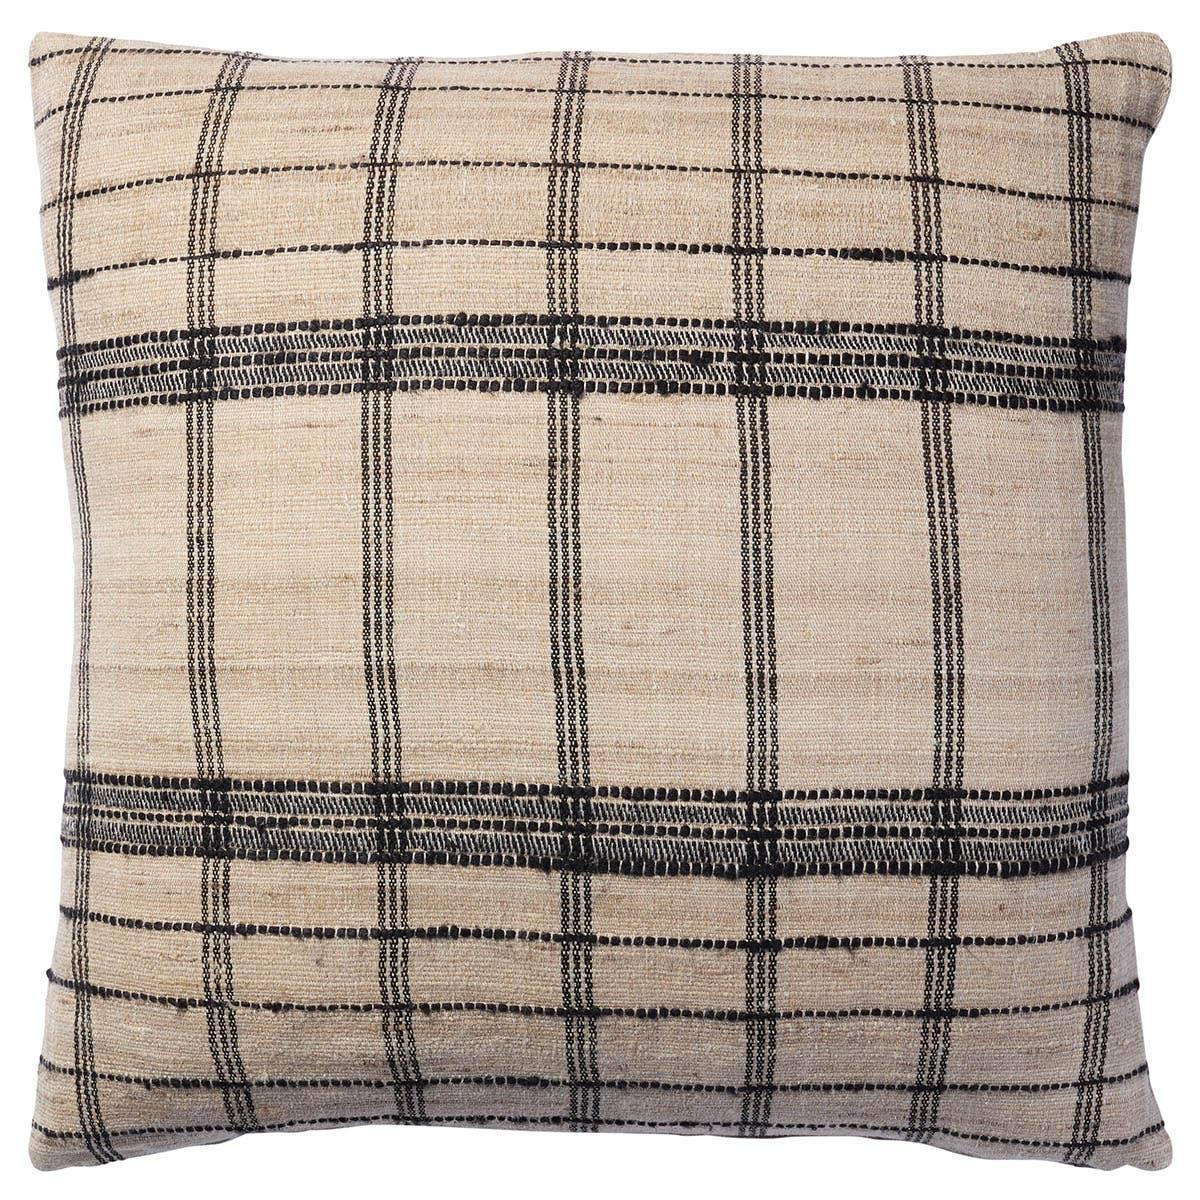 With its minimal, monochrome interpretation of a plaid check, the Carre design brings a touch of antiquity to any space. The neutral colorway and stitch-inspired design balance this heritage inspiration for a unique, handcrafted accent piece that thrives in any indoor space.Indoor Pillow Amethyst Home provides interior design, new home construction design consulting, vintage area rugs, and lighting in the Newport Beach metro area.